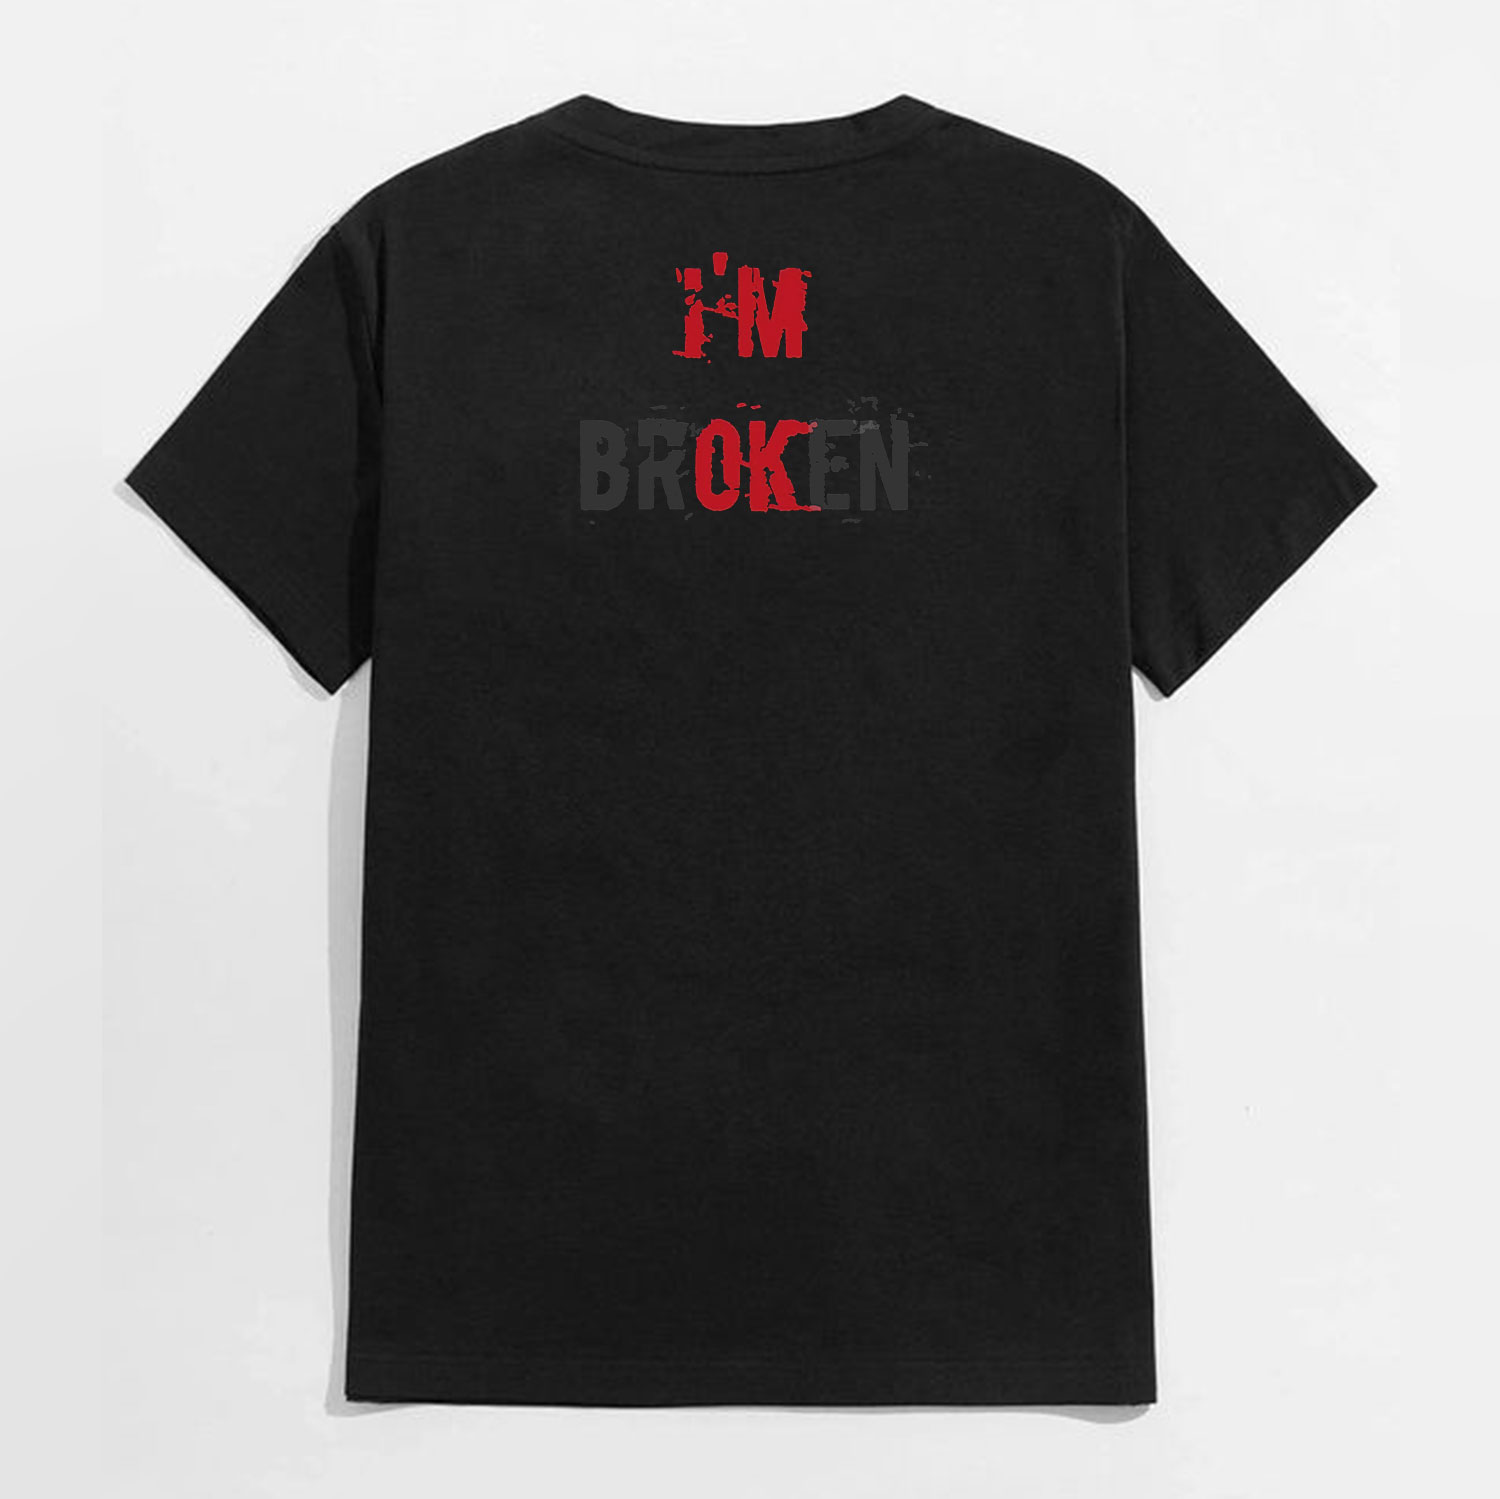 I’M BROKEN Letters Graphic Casual Simple White and Black Print T-shirt